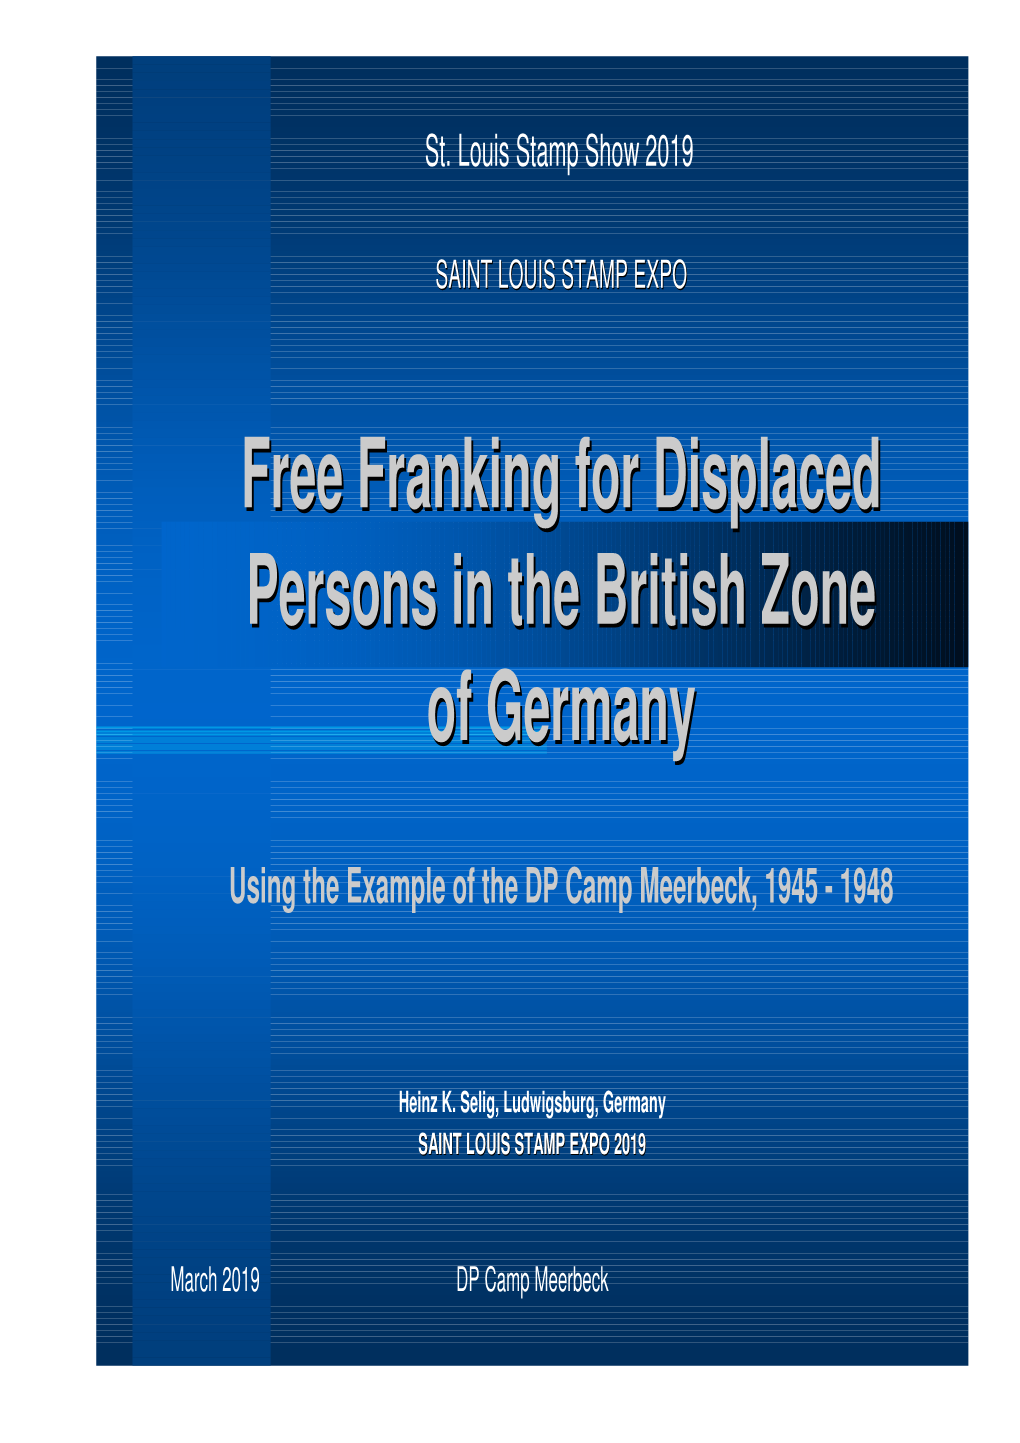 Free Franking for Displaced Persons in the British Zone of Germany